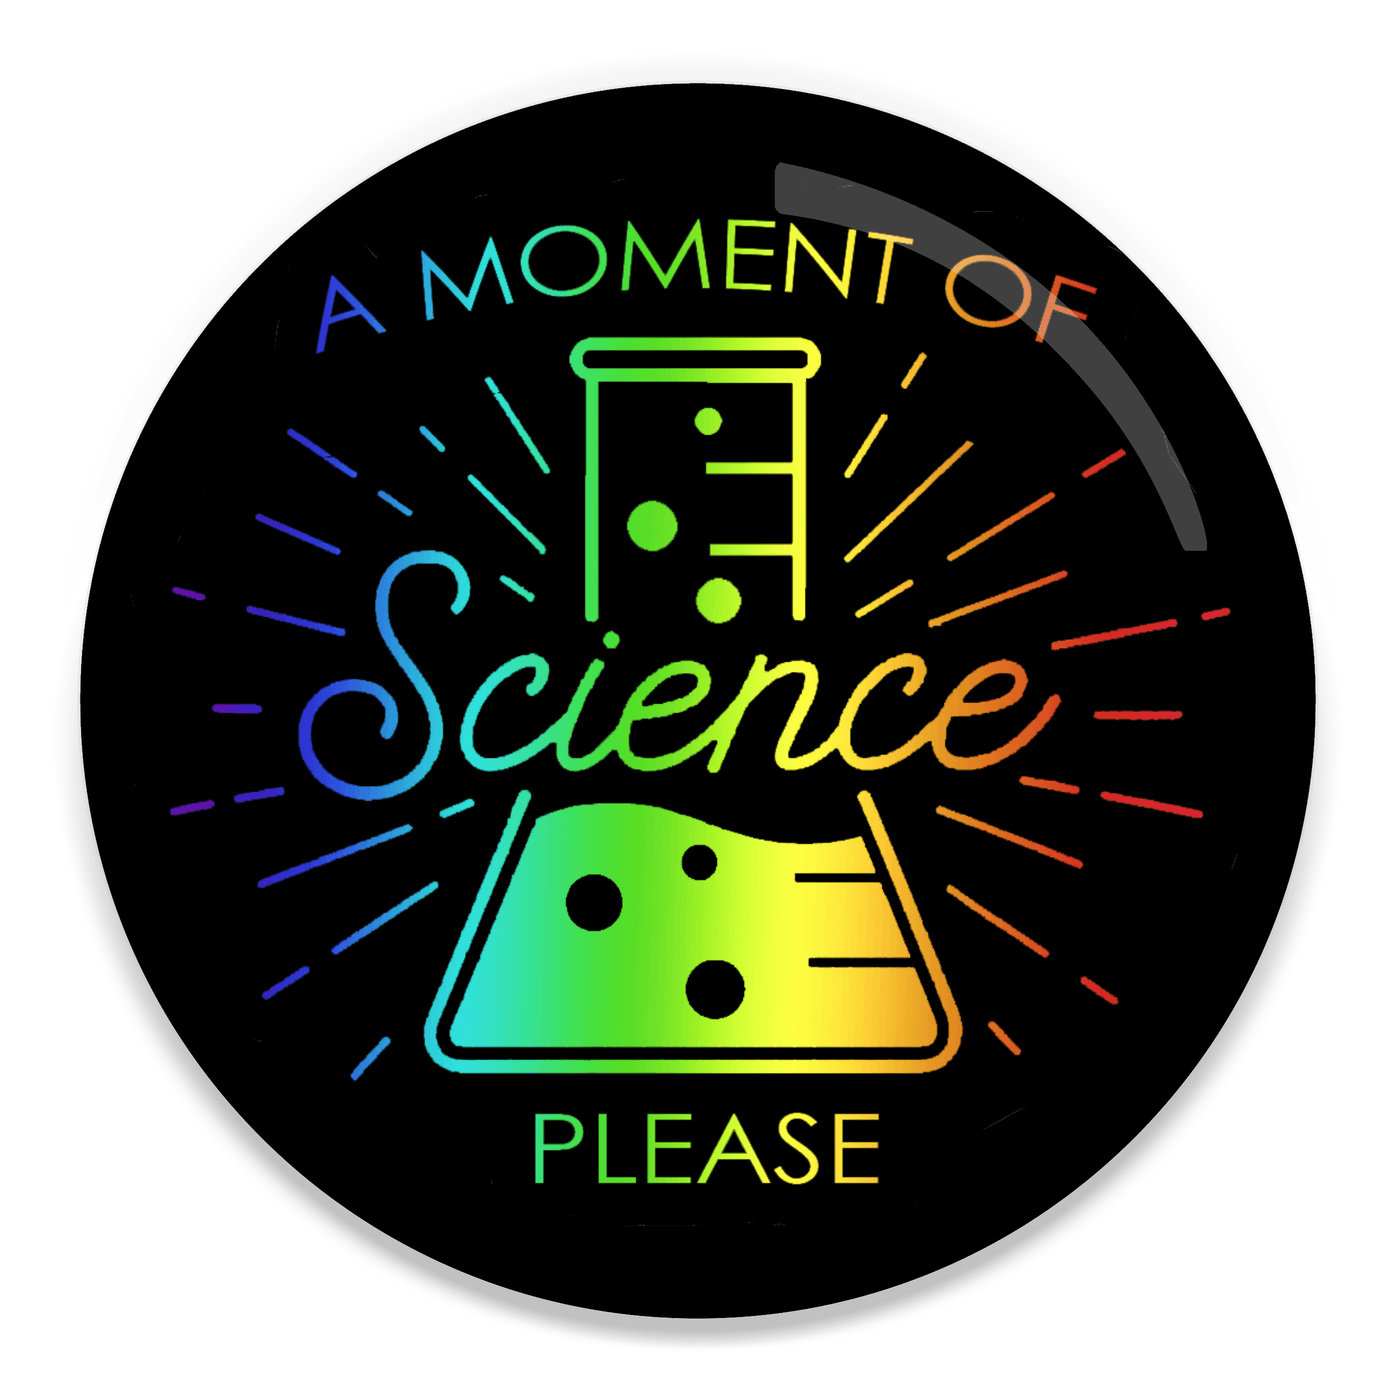 2.25 inch round colorful magnet with image of an Erlenmeyer flask and text saying a moment of science please